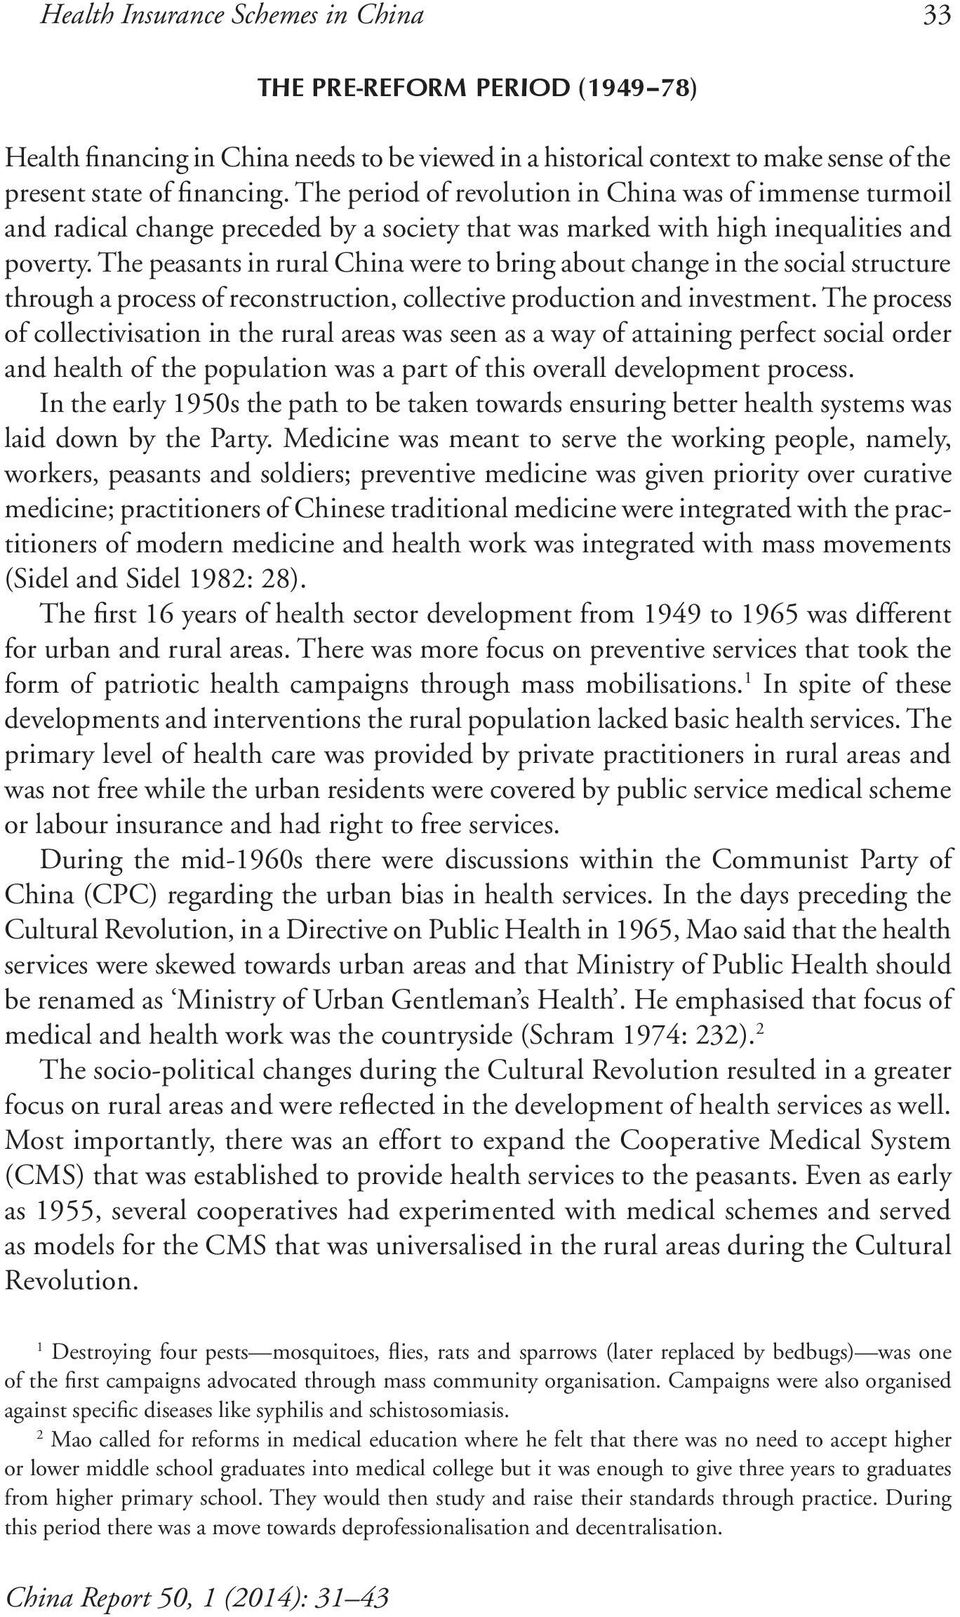 The peasants in rural China were to bring about change in the social structure through a process of reconstruction, collective production and investment.